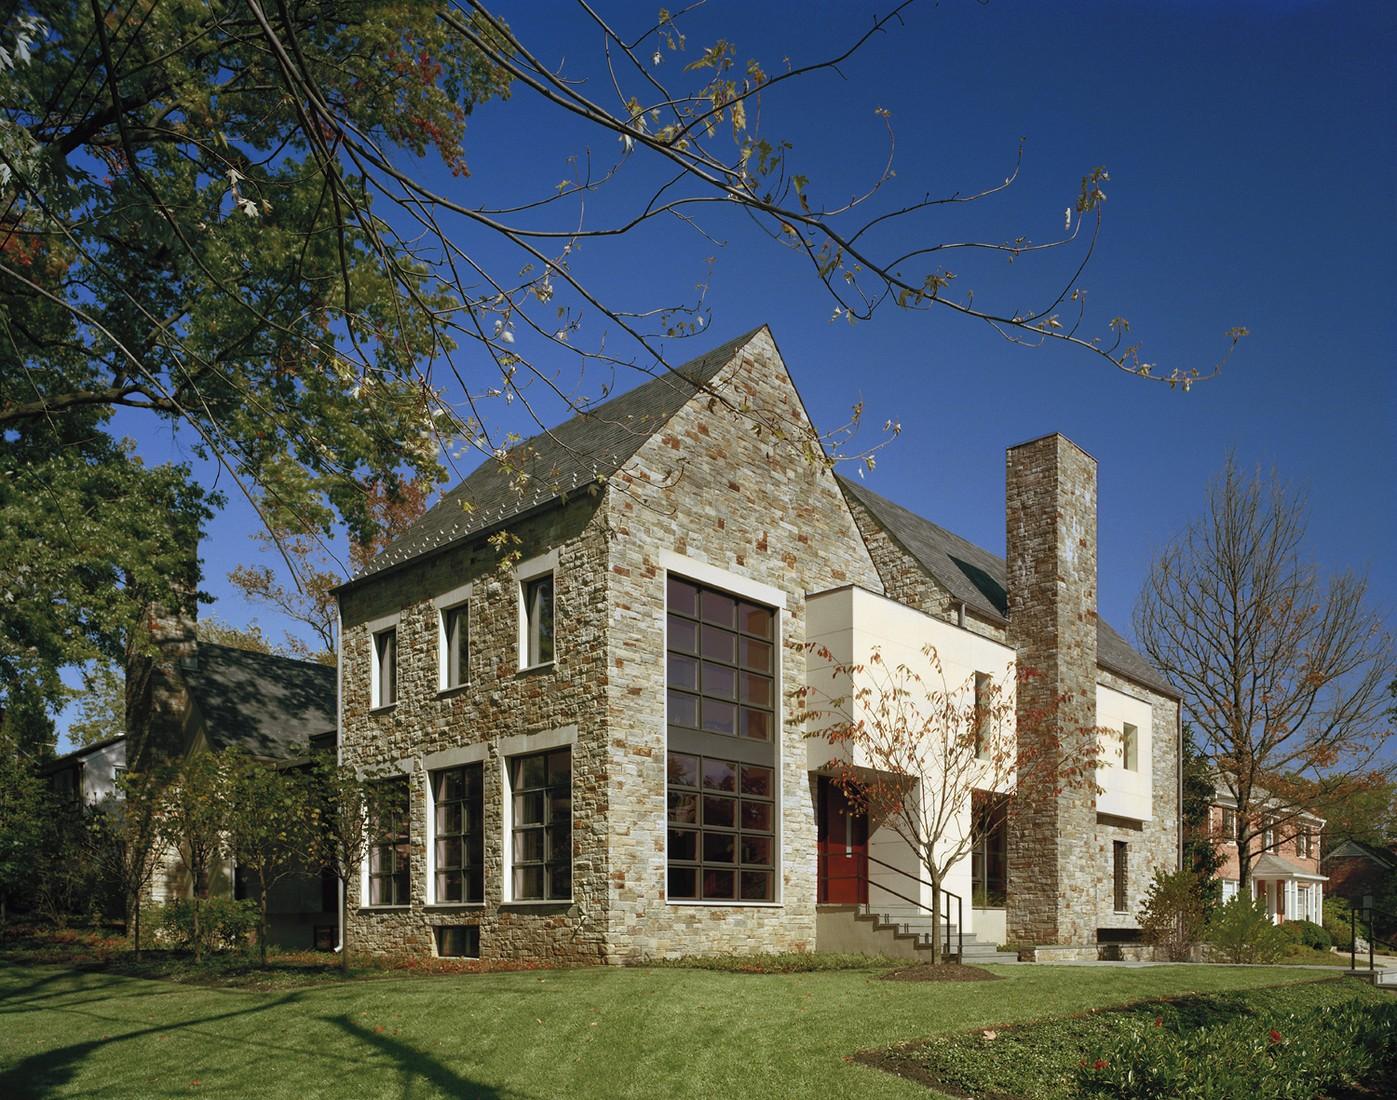 House Design Residence Interesting House Design Of Edgemoor Residence With Bright Colored Wall Which Is Made From Stone Veneer And Stone Chimney Architecture  Modern Classic Design From A House In USA 